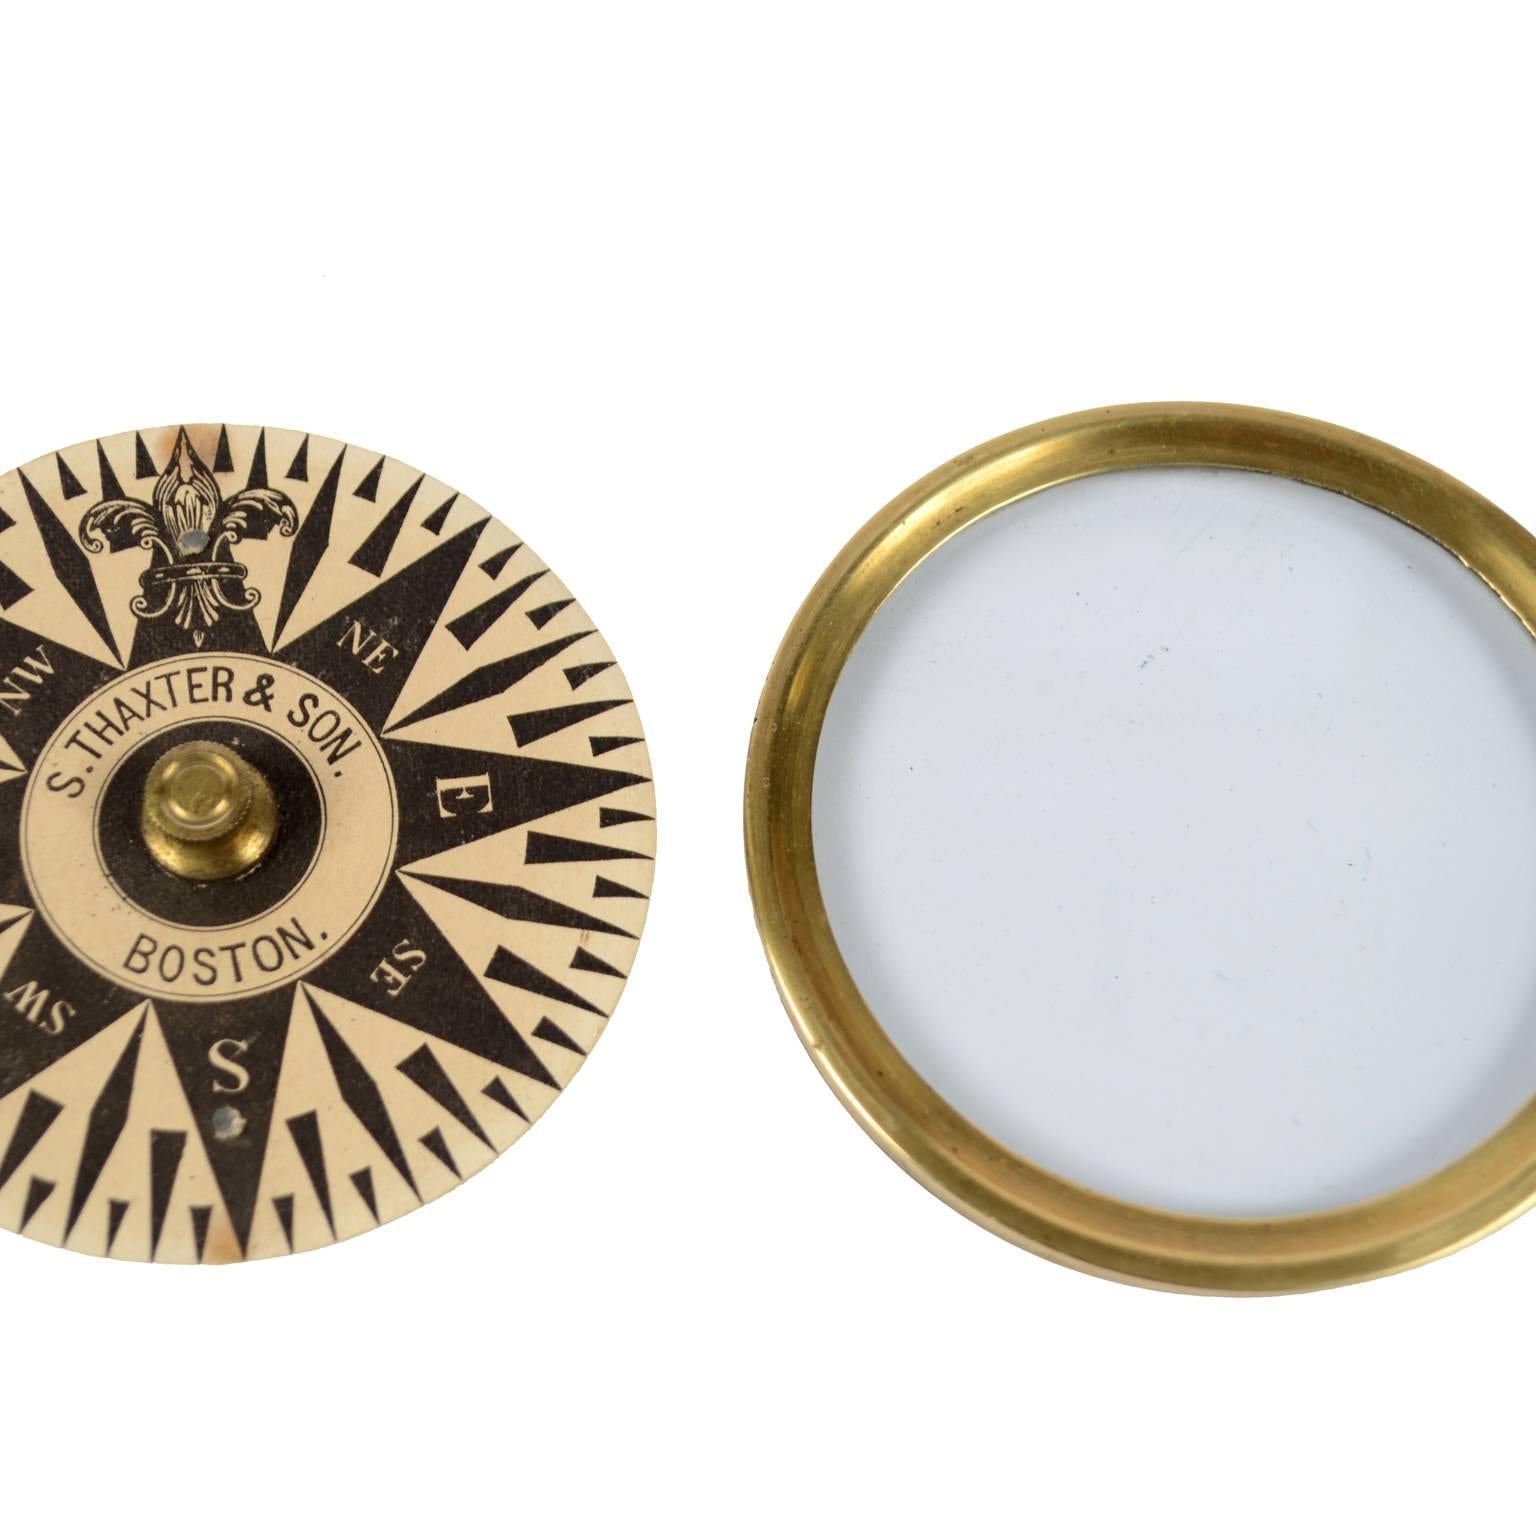 American Compass Placed in Its Original Box of Turned Brass 1